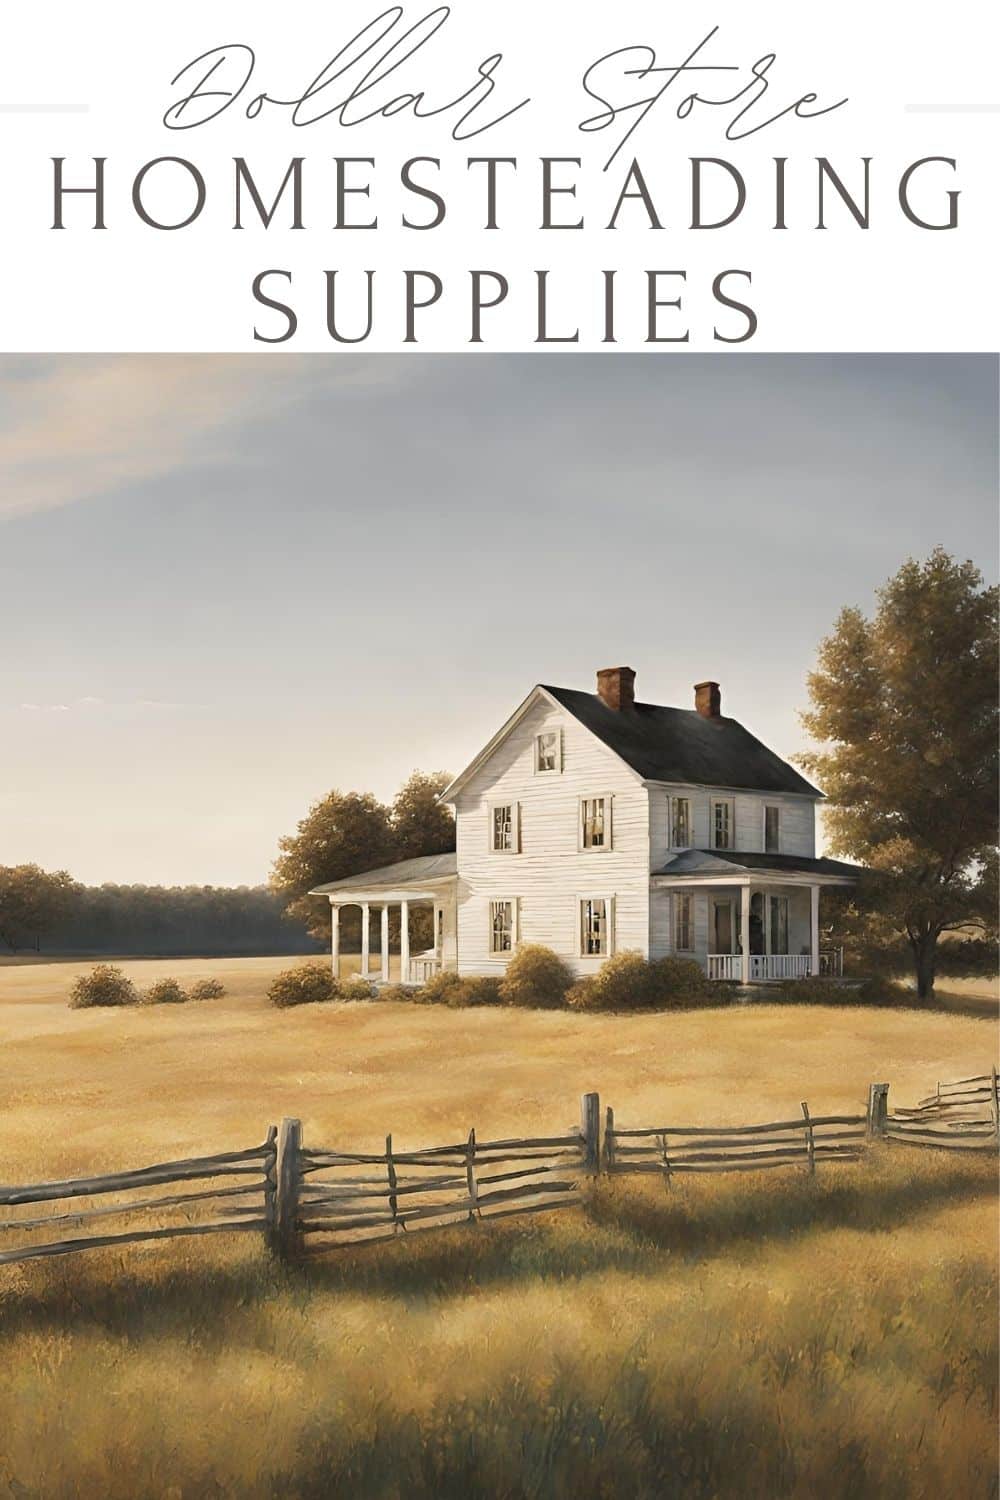 Canning/Homesteading Supplies - Buy, Sell, Trade